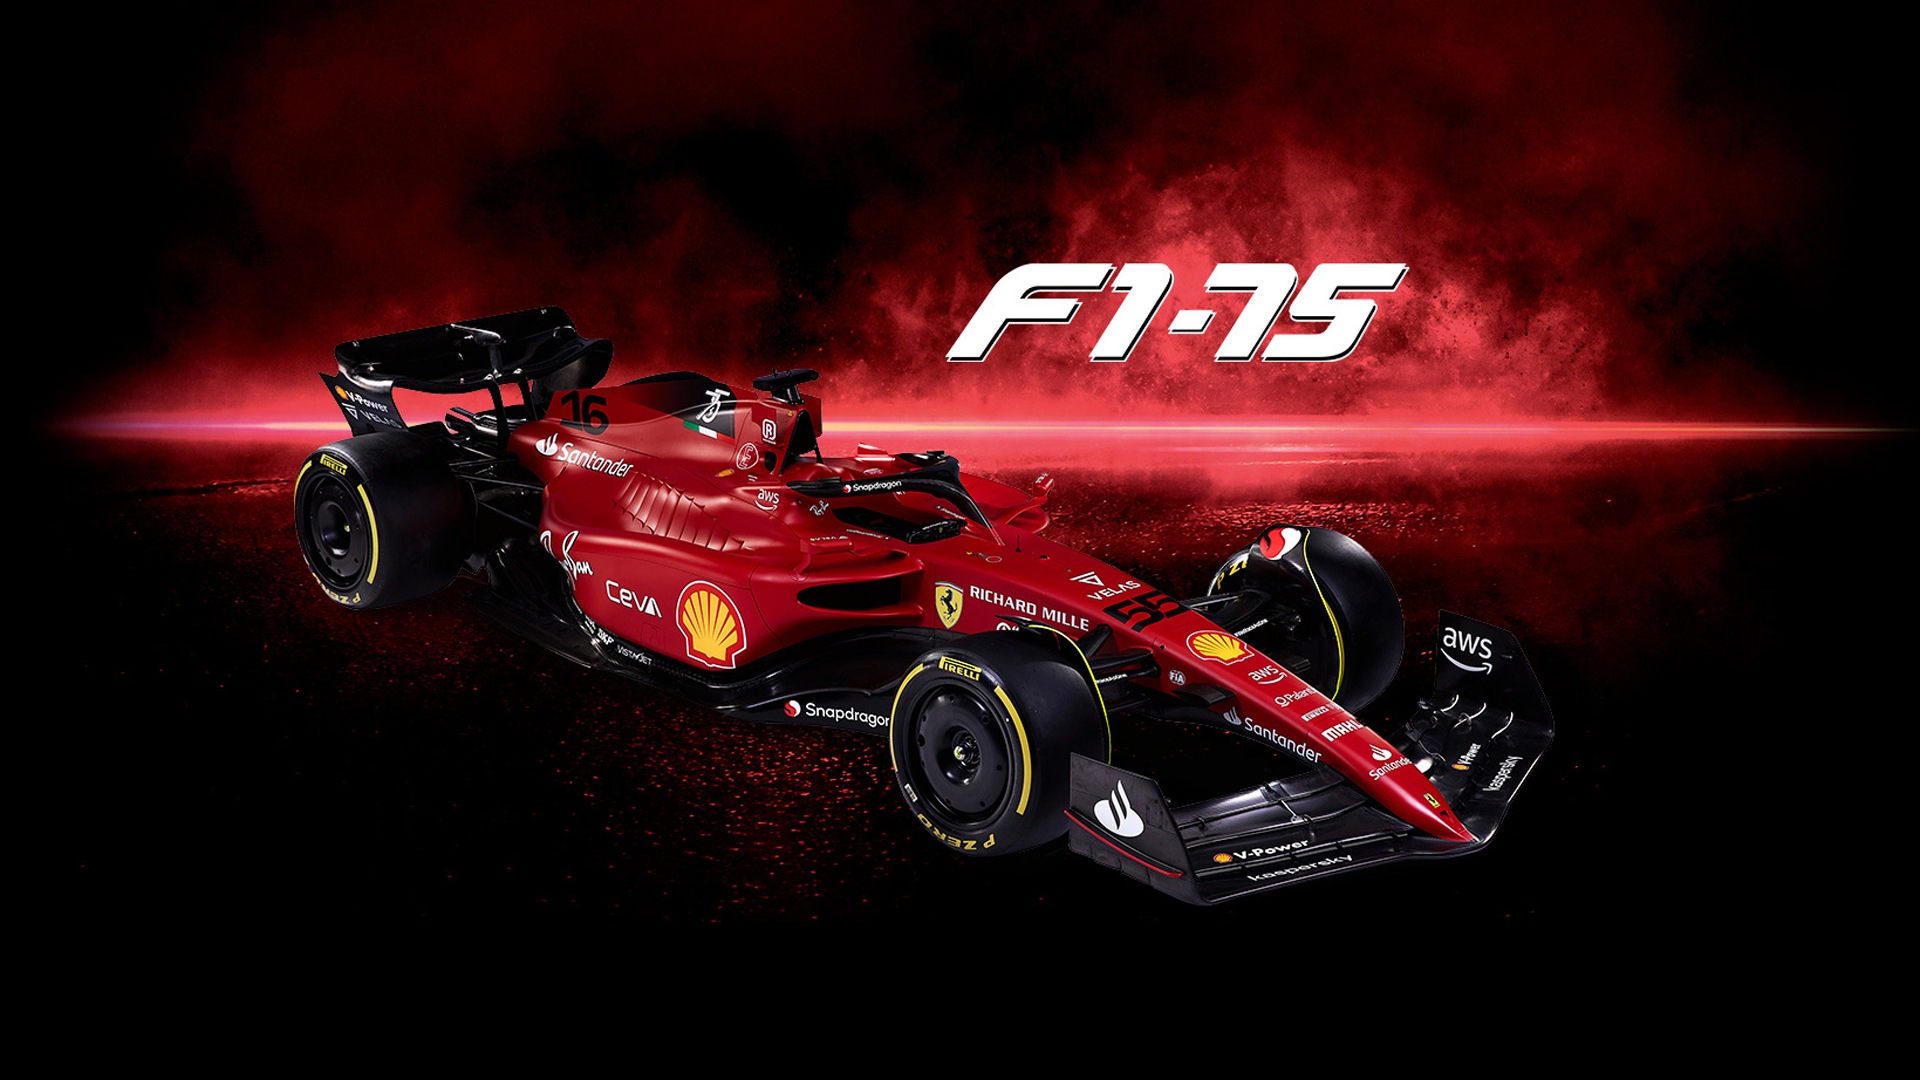 Add a touch of luxury to your device with this Ferrari F1 75 wallpaper 1920x1080